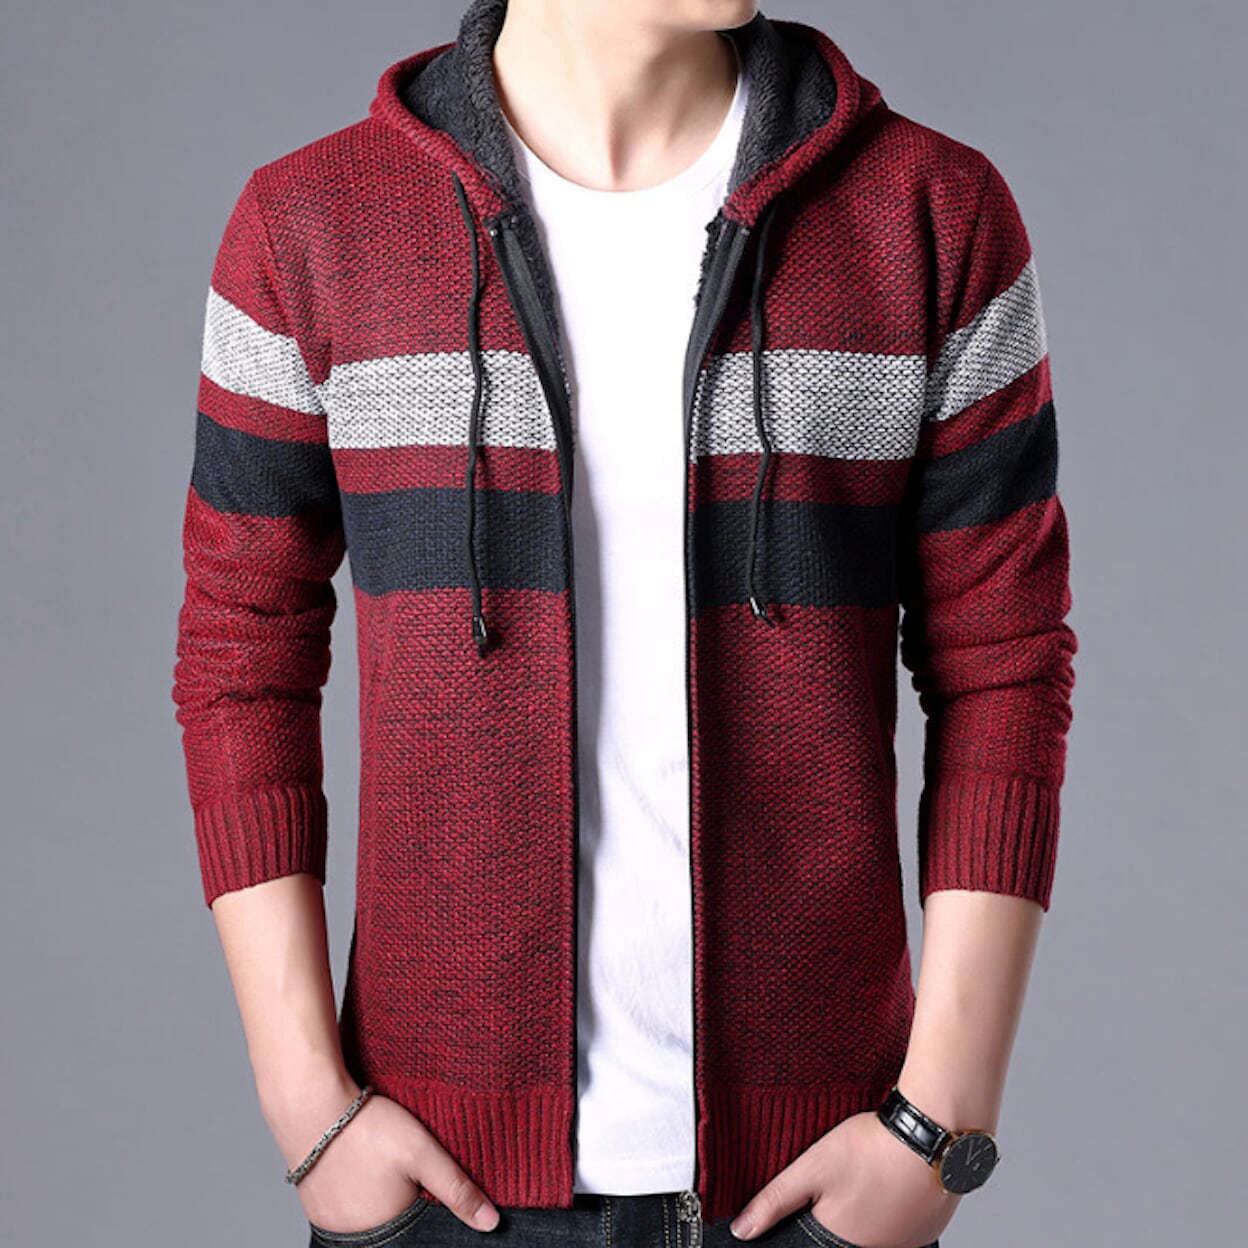 Mens Striped Knit Cardigan with Hood